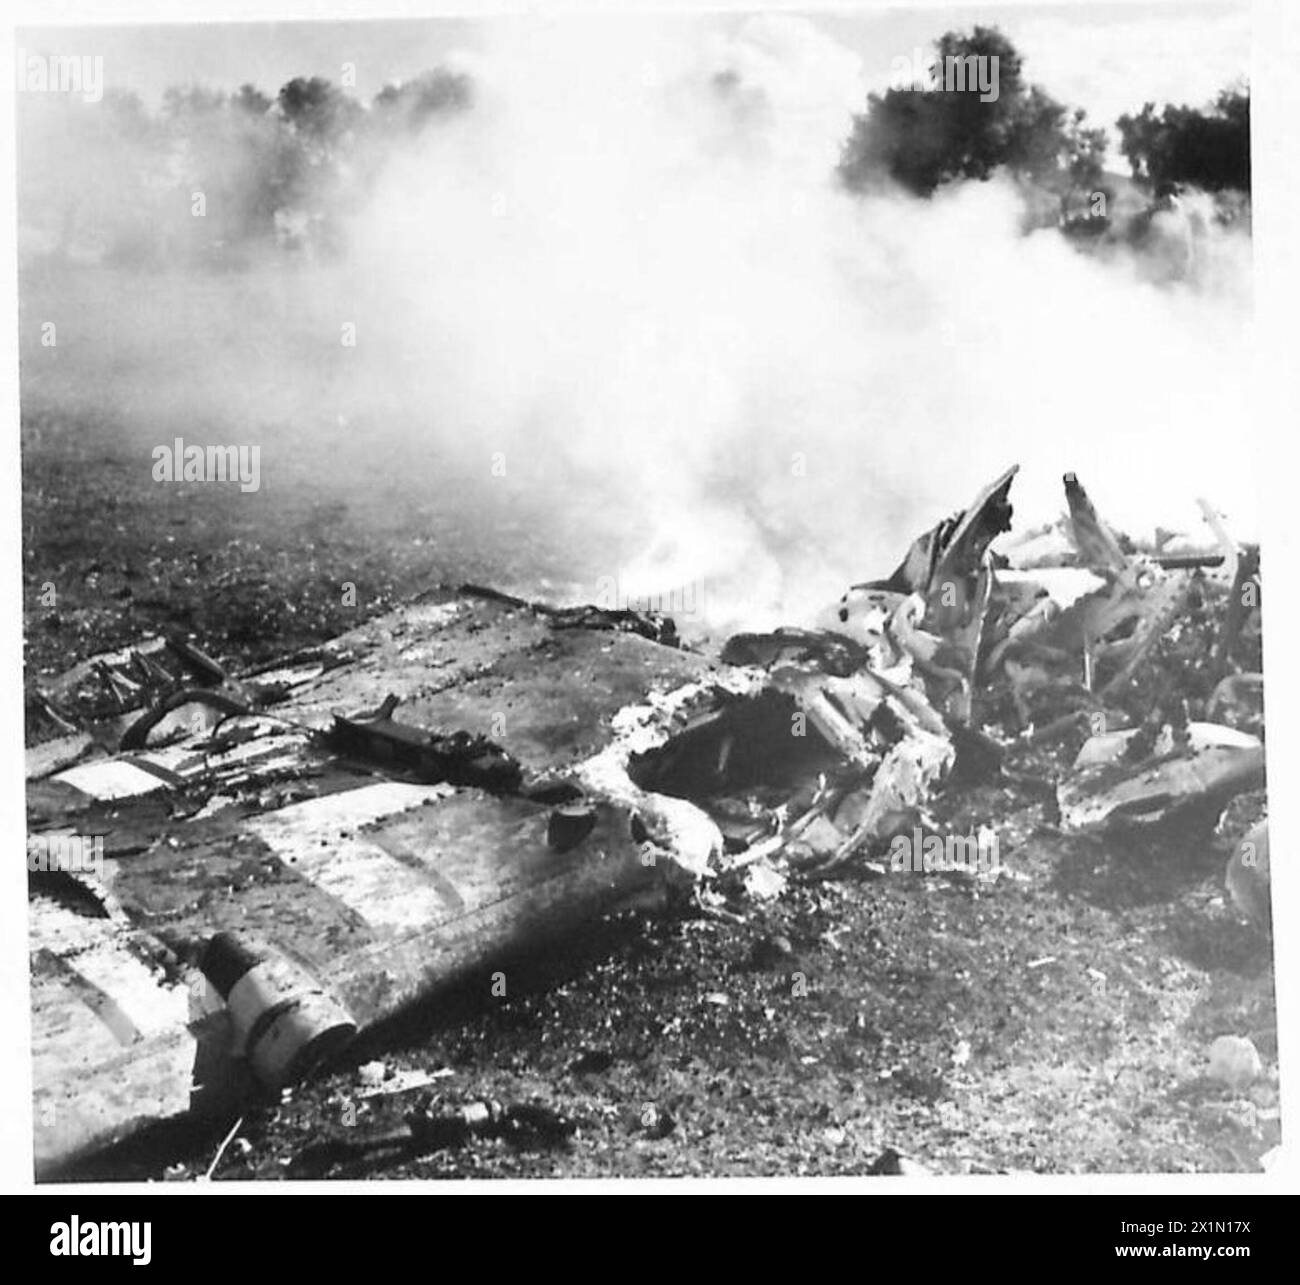 THE BRITISH ARMY IN THE TUNISIA CAMPAIGN, NOVEMBER 1942-MAY 1943 - One of the two JU 88s shot down in Bou Arada, the crew were burnt to death. The battle at Bou Arada flared up again. The Germans attacked from the 'Two Tree Hill' with tanks and infantry. Troops of the British V Corps in position on the 'Green Hill' (about 5000 yards away from the 'Two Tree Hill') held and beat back the attack. 17 German tanks were destroyed by British 25 pounder guns. The battle continued all day with Messerschmitts and Junkers dive bombing British positions. One ME and two JU 88s were shot down. 18 January 19 Stock Photo